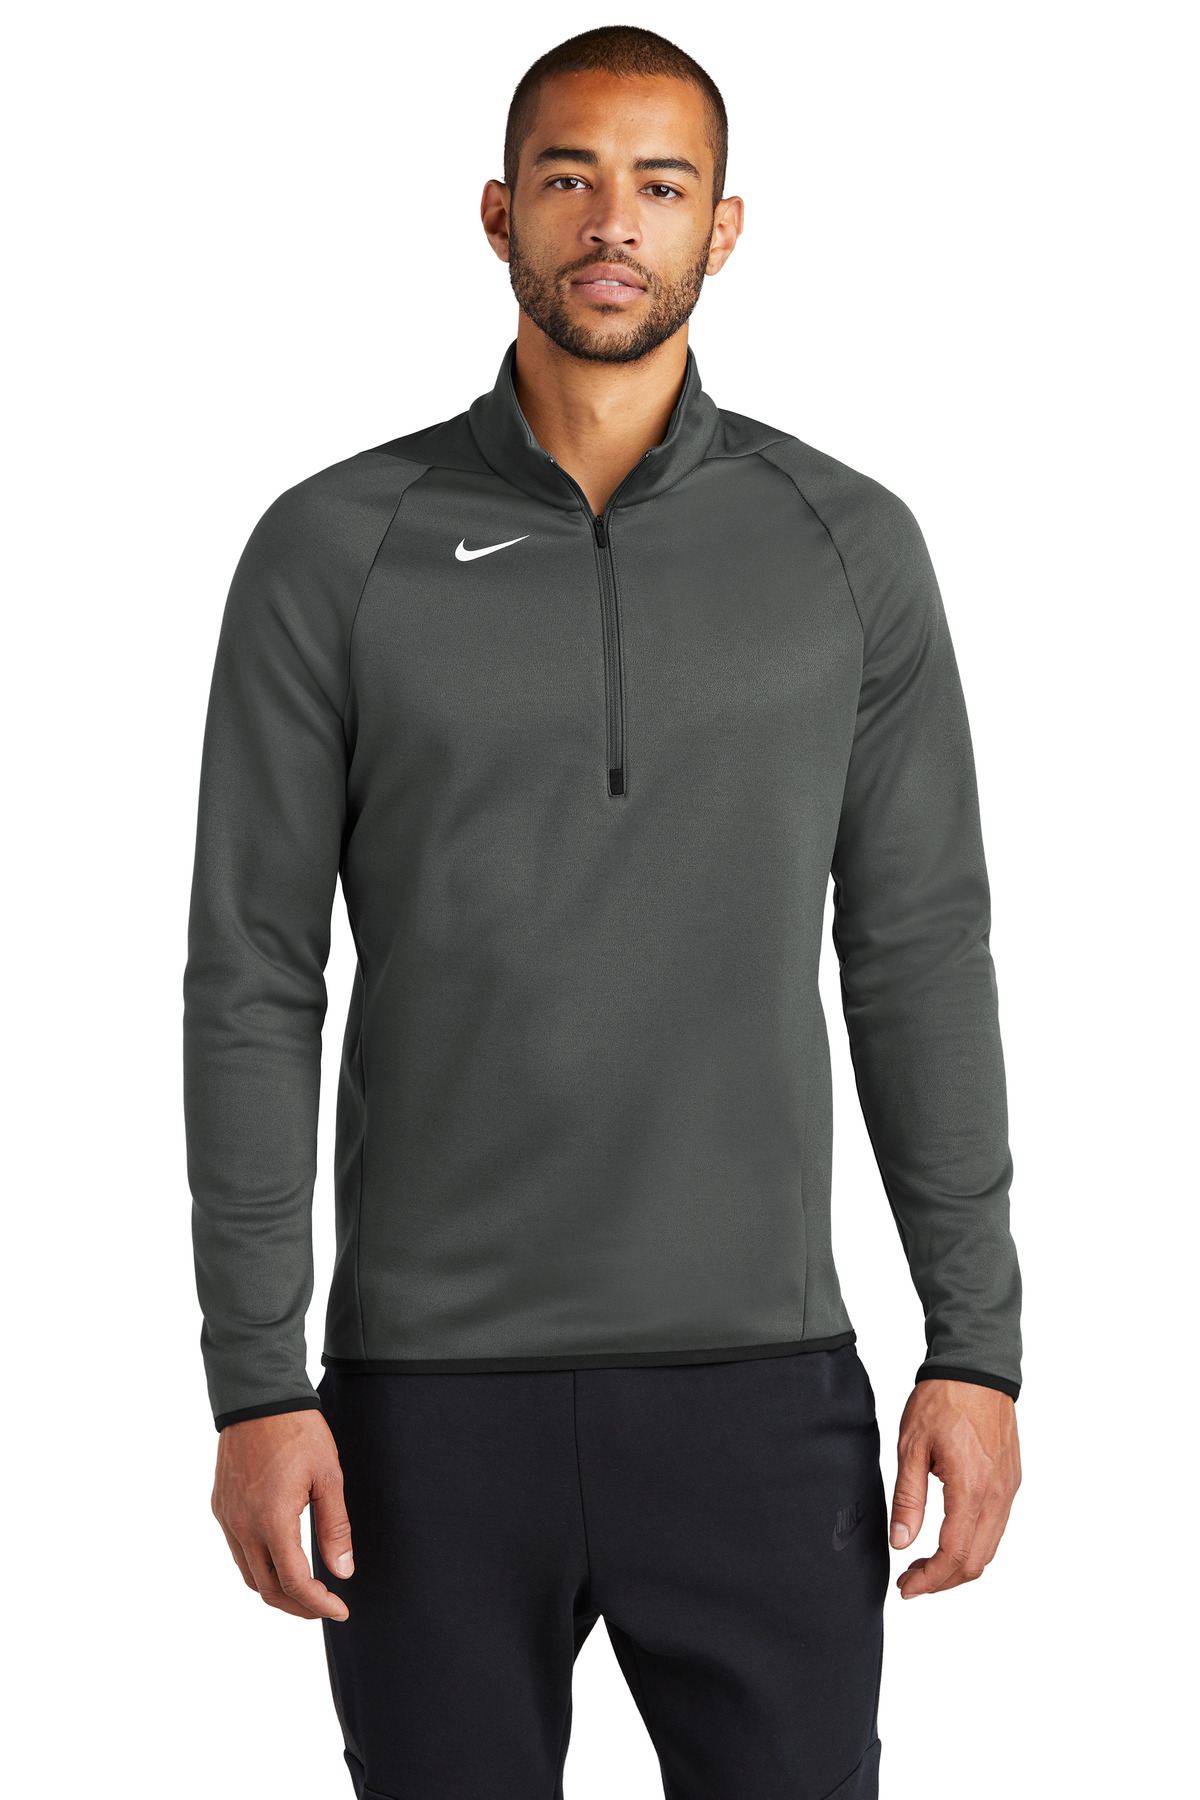 LIMITED EDITION Nike Therma-FIT 1/4-Zip Fleec-Nike